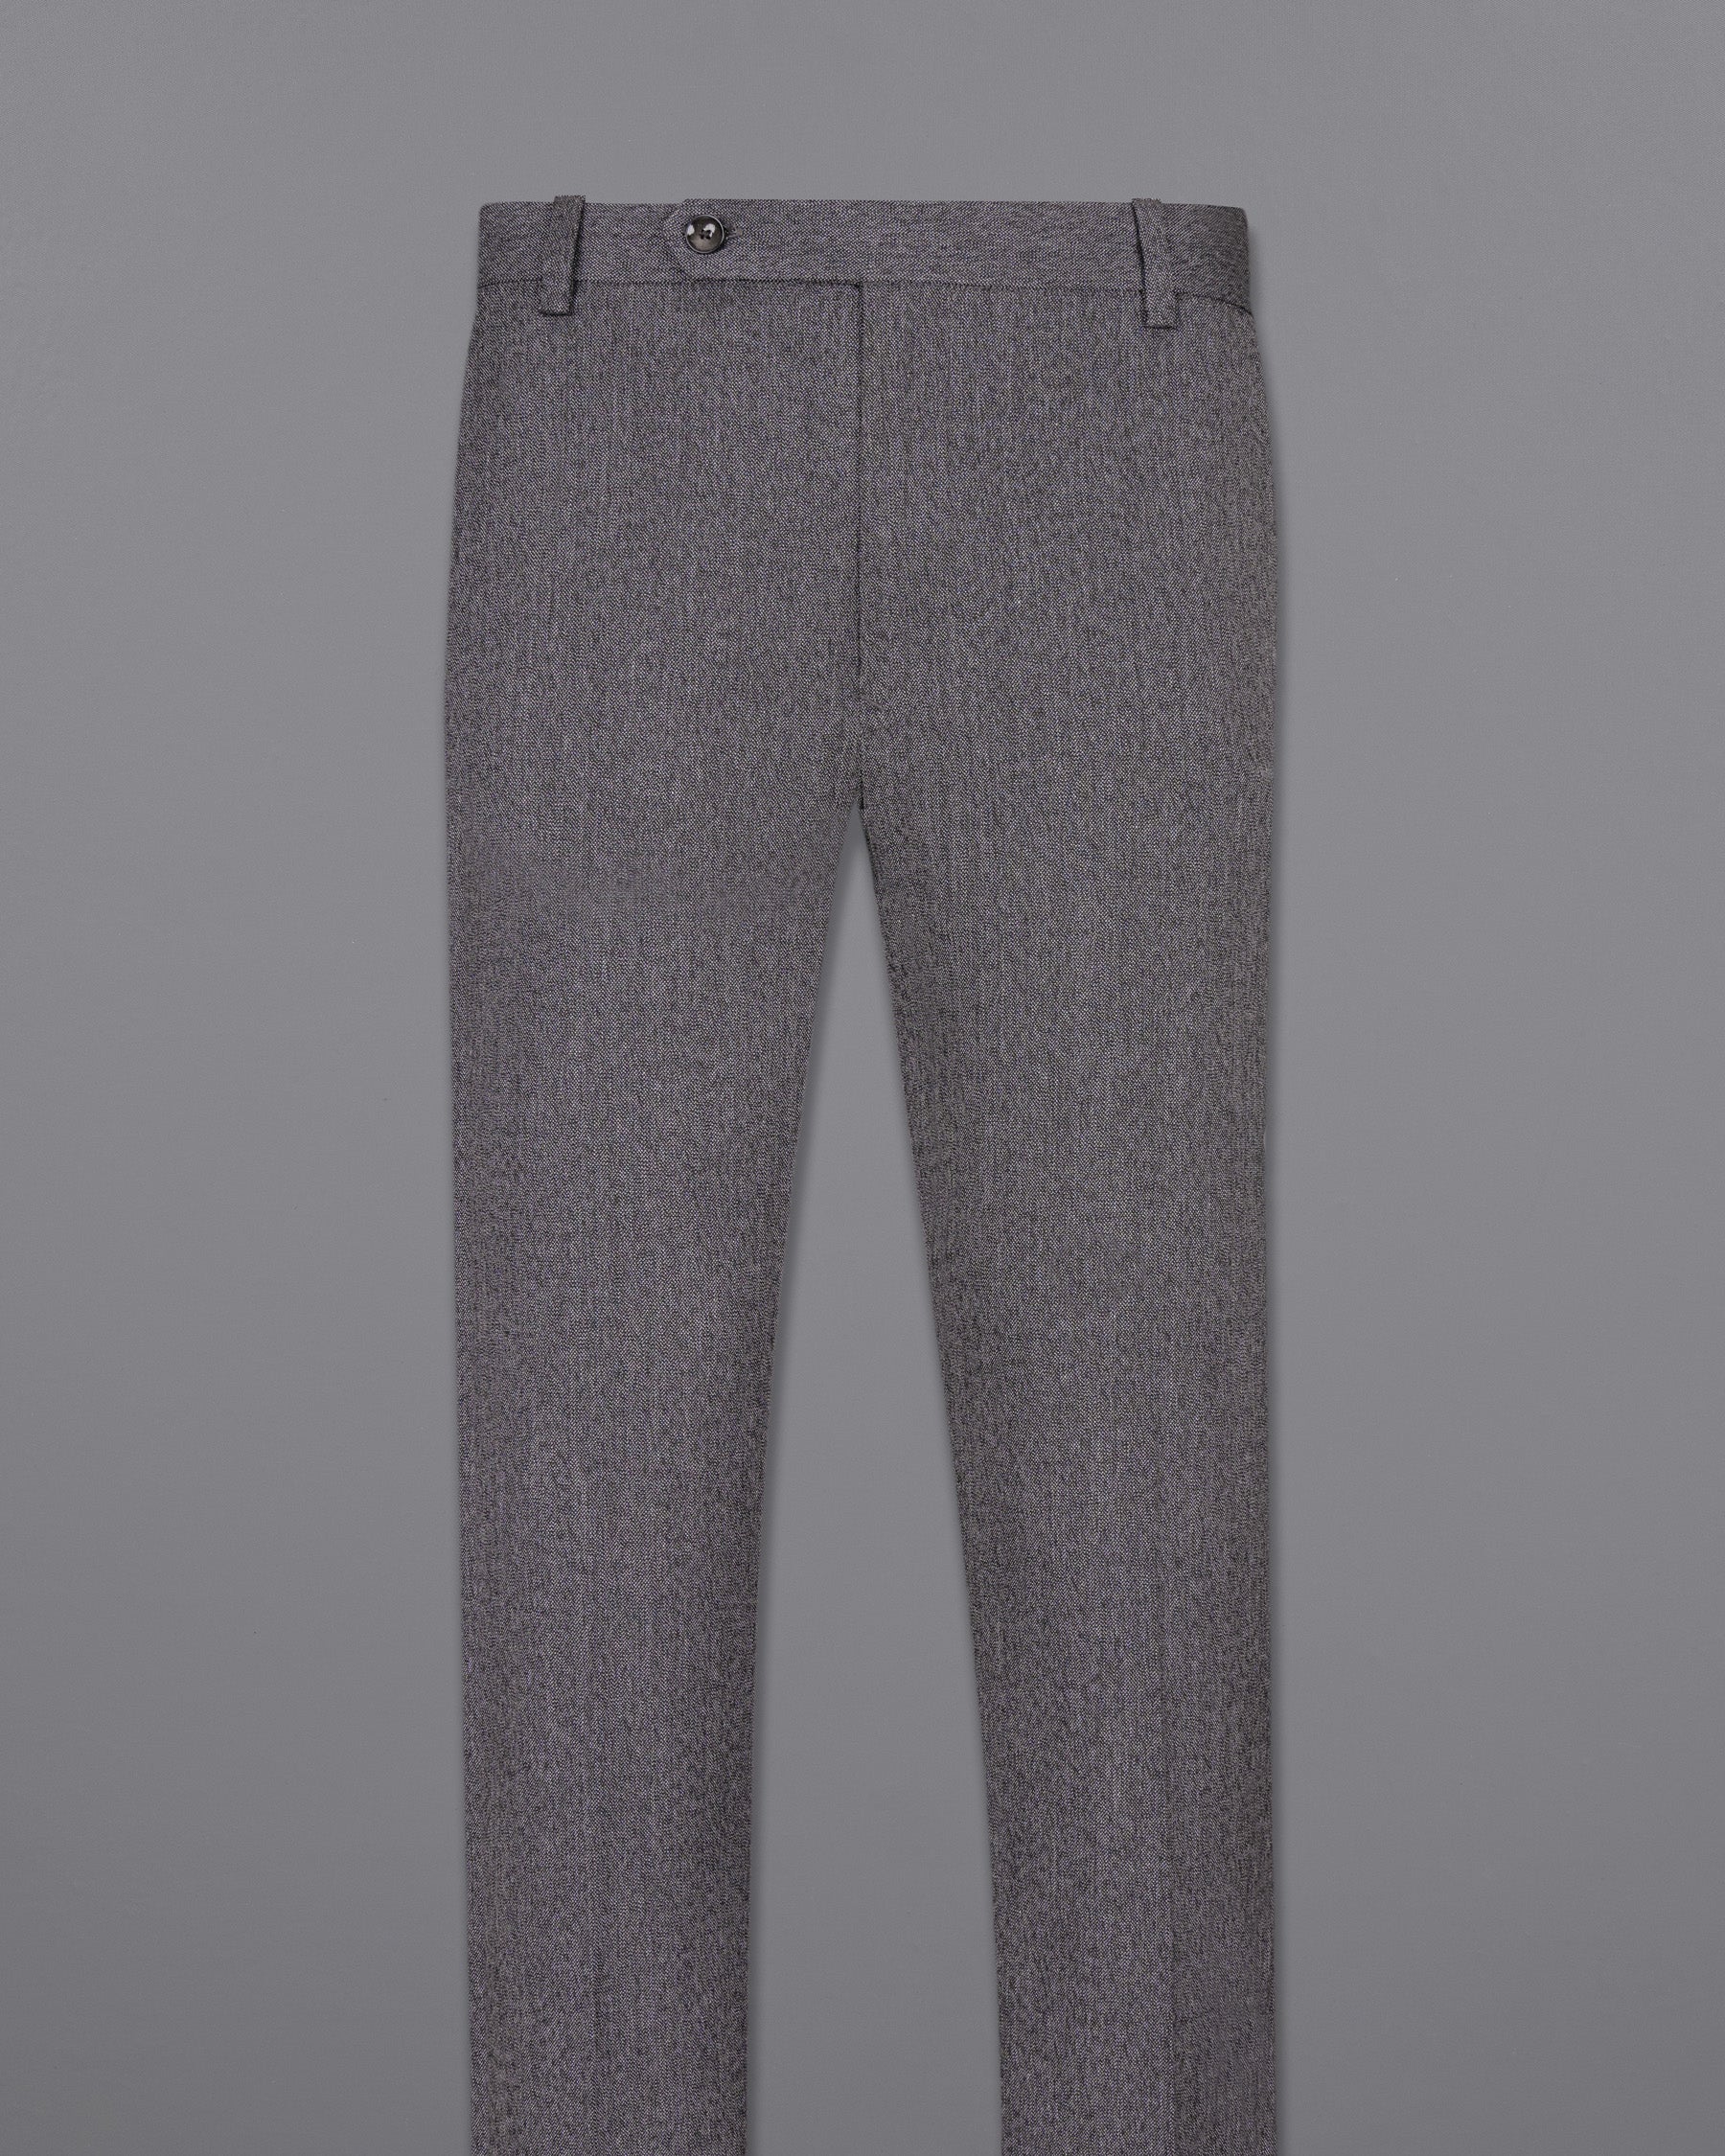 Mobster Grey Double-Breasted Premium Cotton Suit